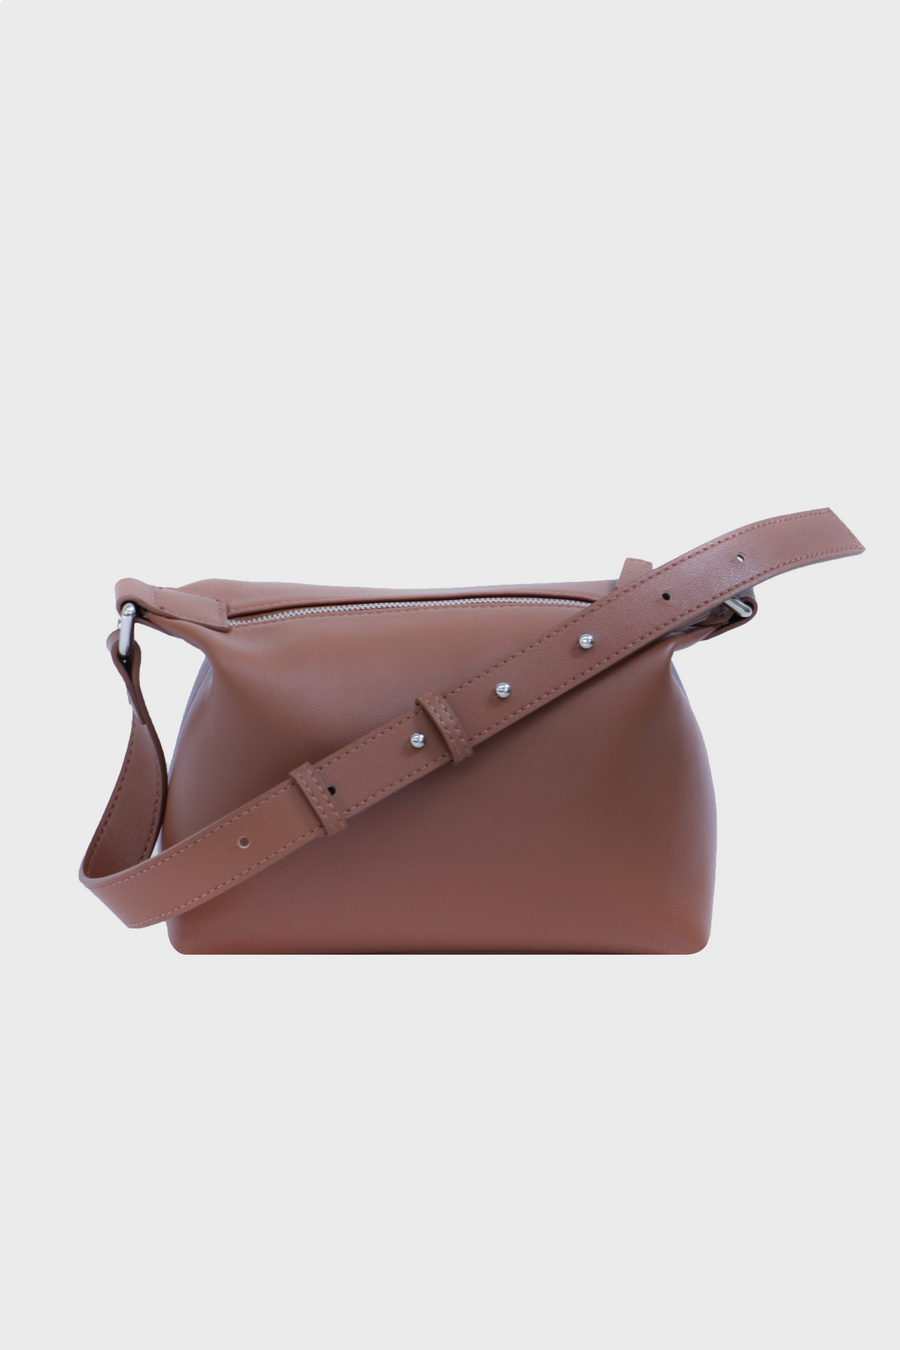 Each Other x Elizabeth Sulcer Soft Leather Small Hobo Bag